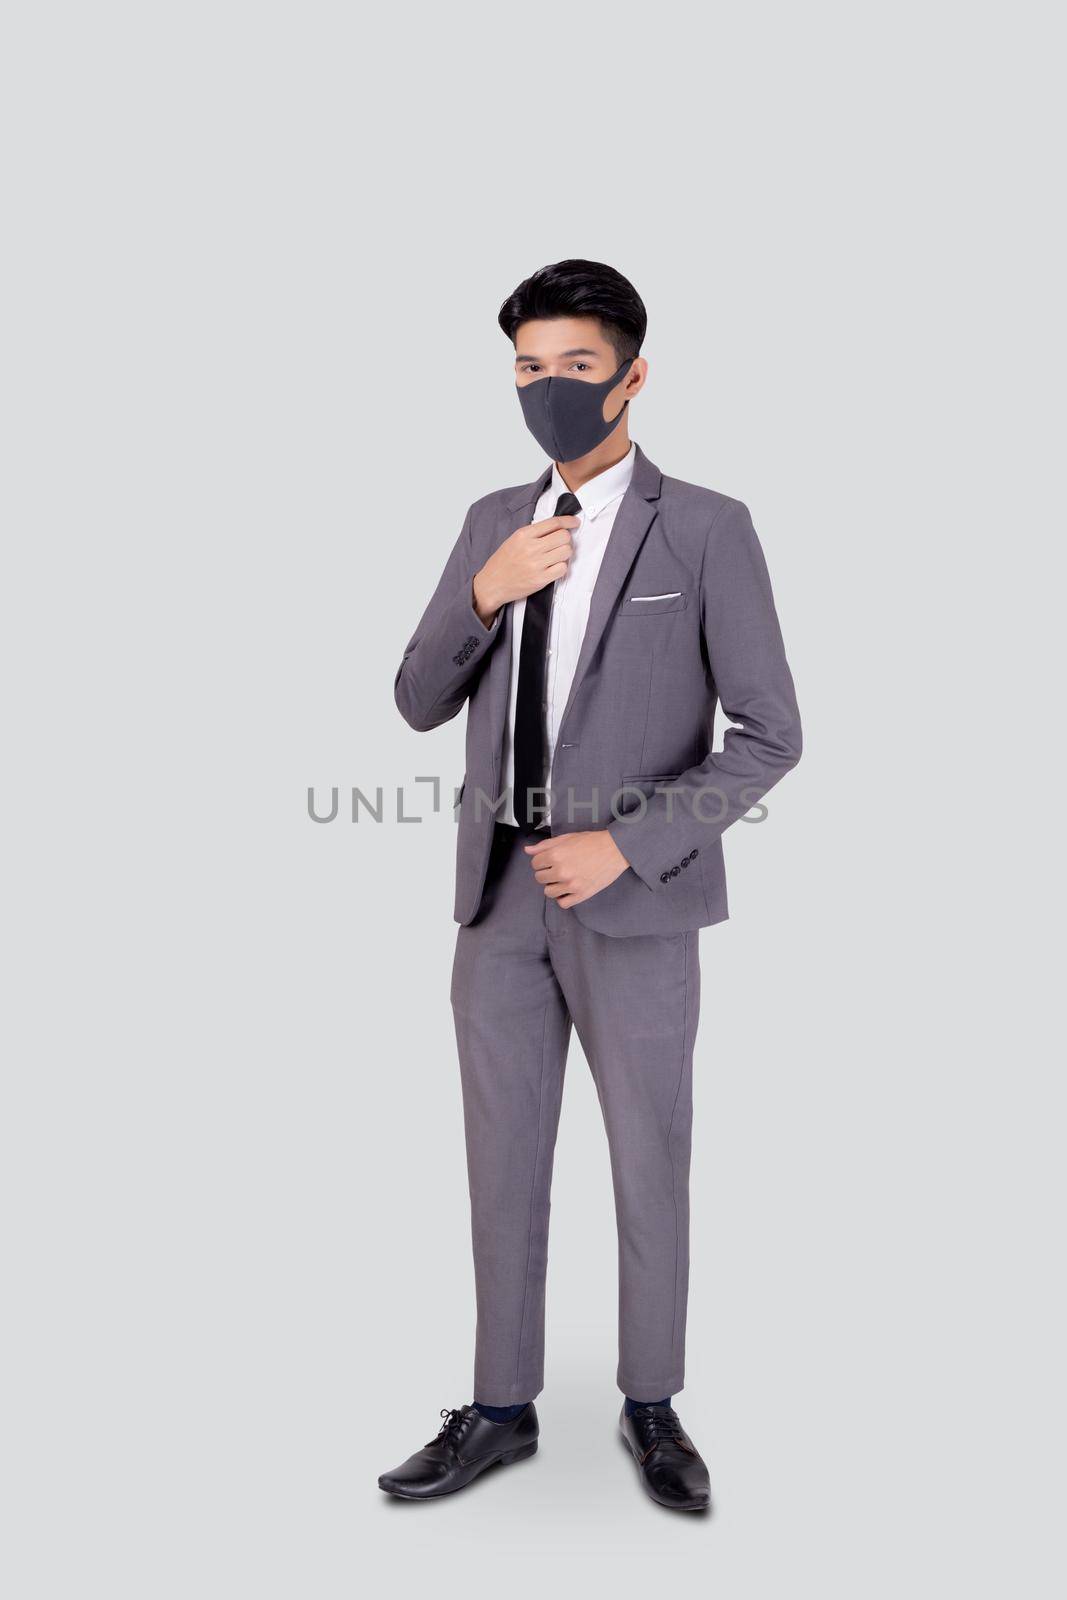 Portrait young asian businessman in suit wearing face mask for protective covid-19 isolated on white background, business man hand holding neck tie, quarantine for pandemic coronavirus, new normal. by nnudoo